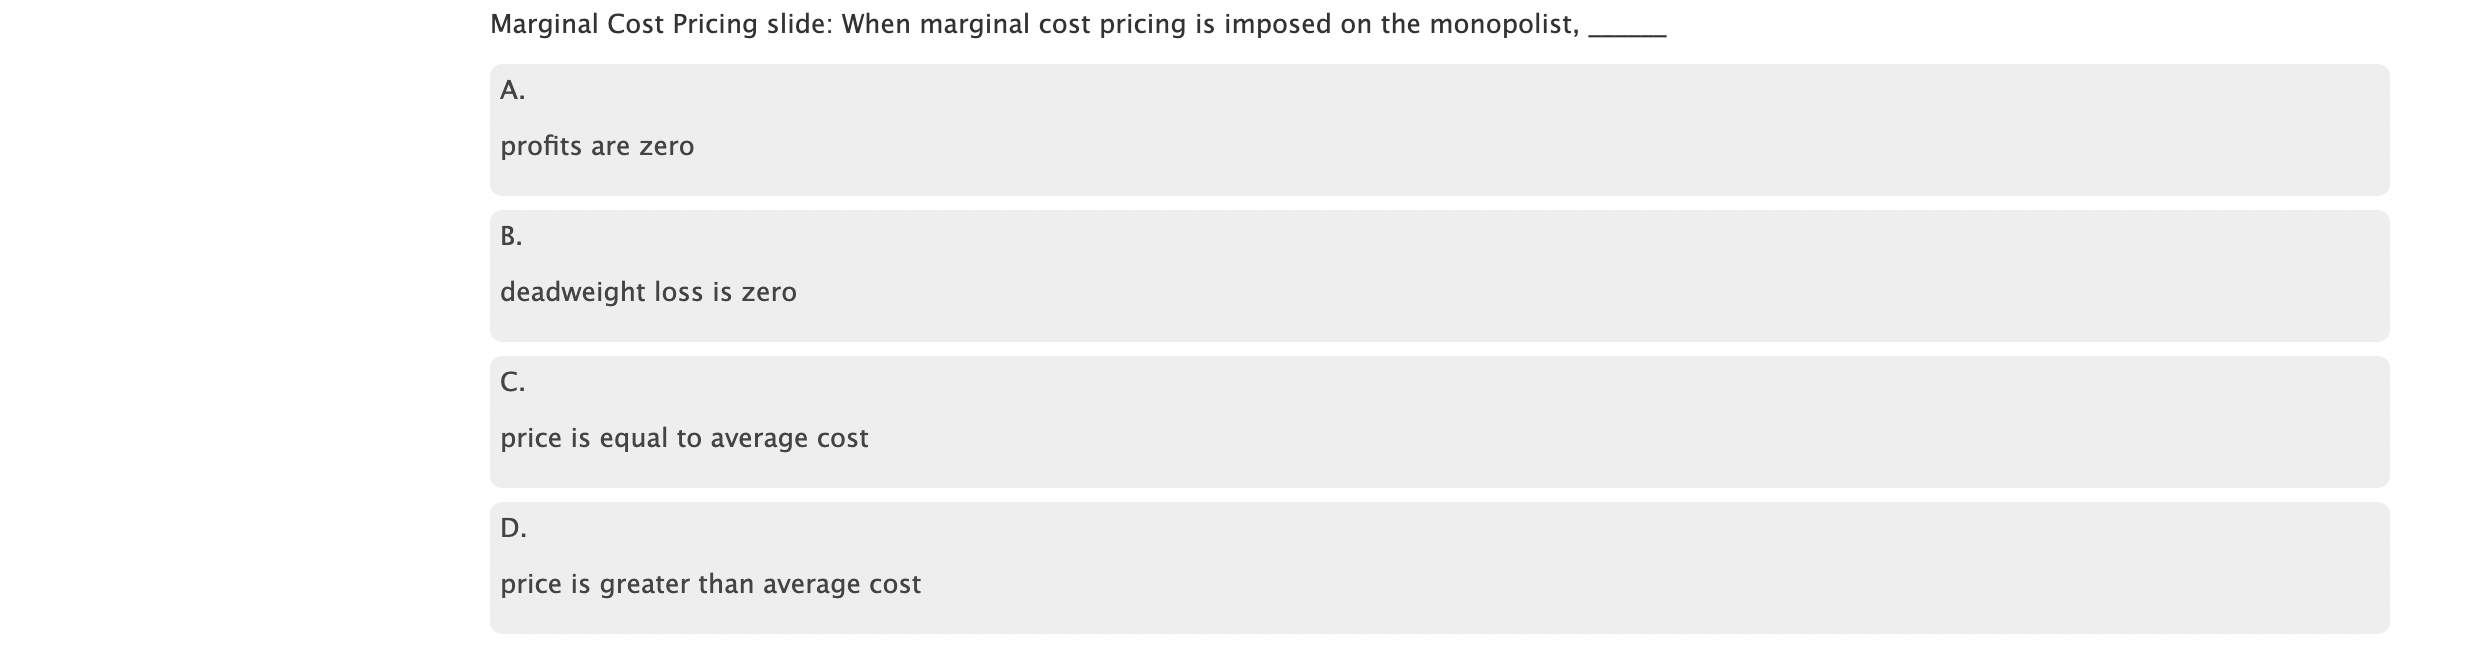 Marginal Cost Pricing slide: When marginal cost pricing is imposed on the monopolist,
A.
profits are zero
B.
deadweight loss is zero
C.
price is equal to average cost
D.
price is greater than average cost